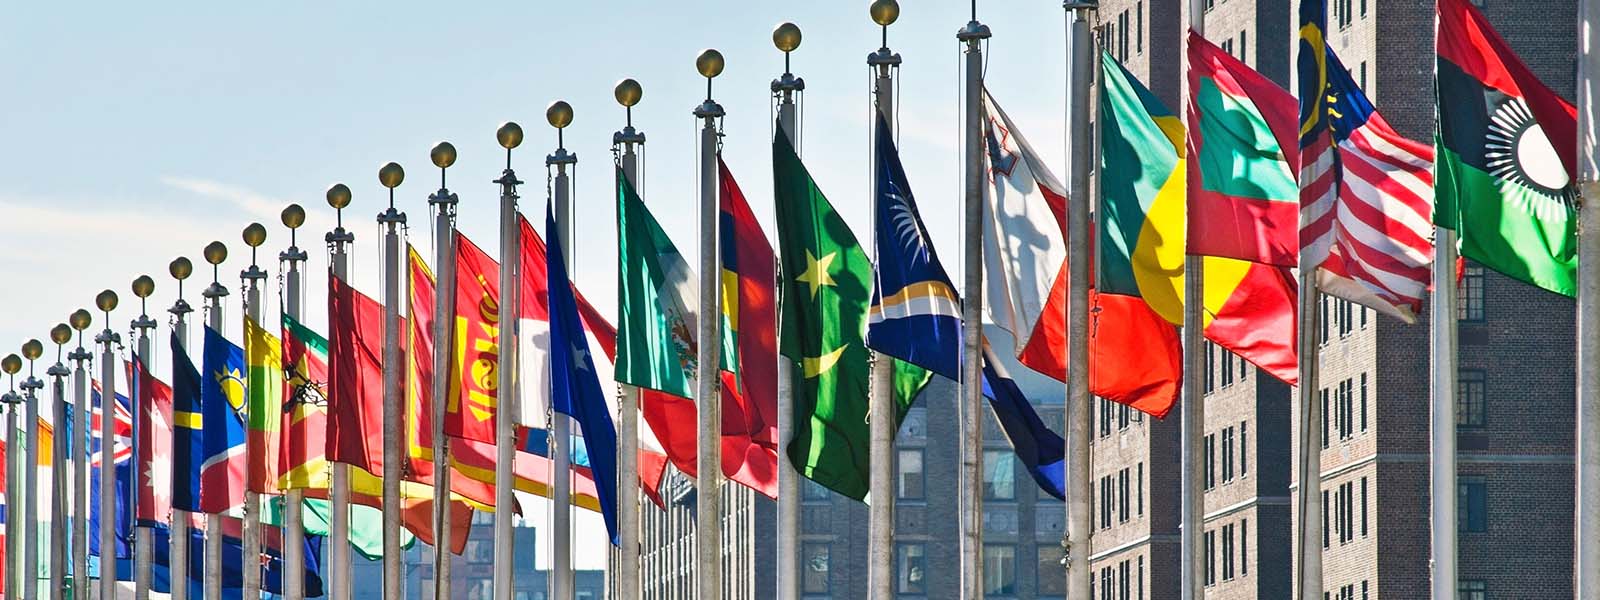 Flags of all nations outside the UN in New York City